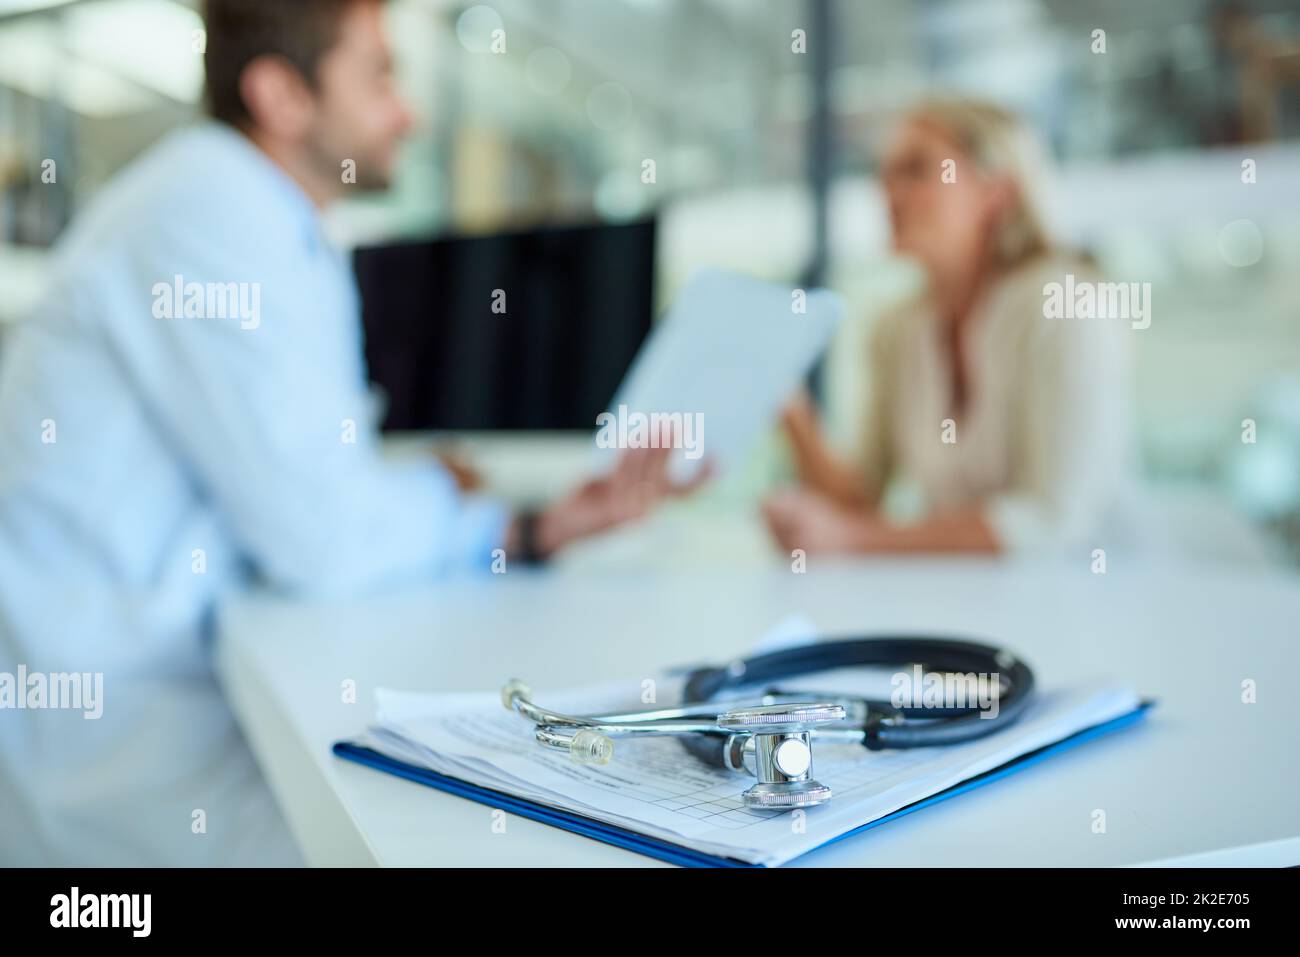 Were always here to listen to your health concerns. Shot of a stethoscope and a clipboard on a desk with a doctor and patient in the background. Stock Photo